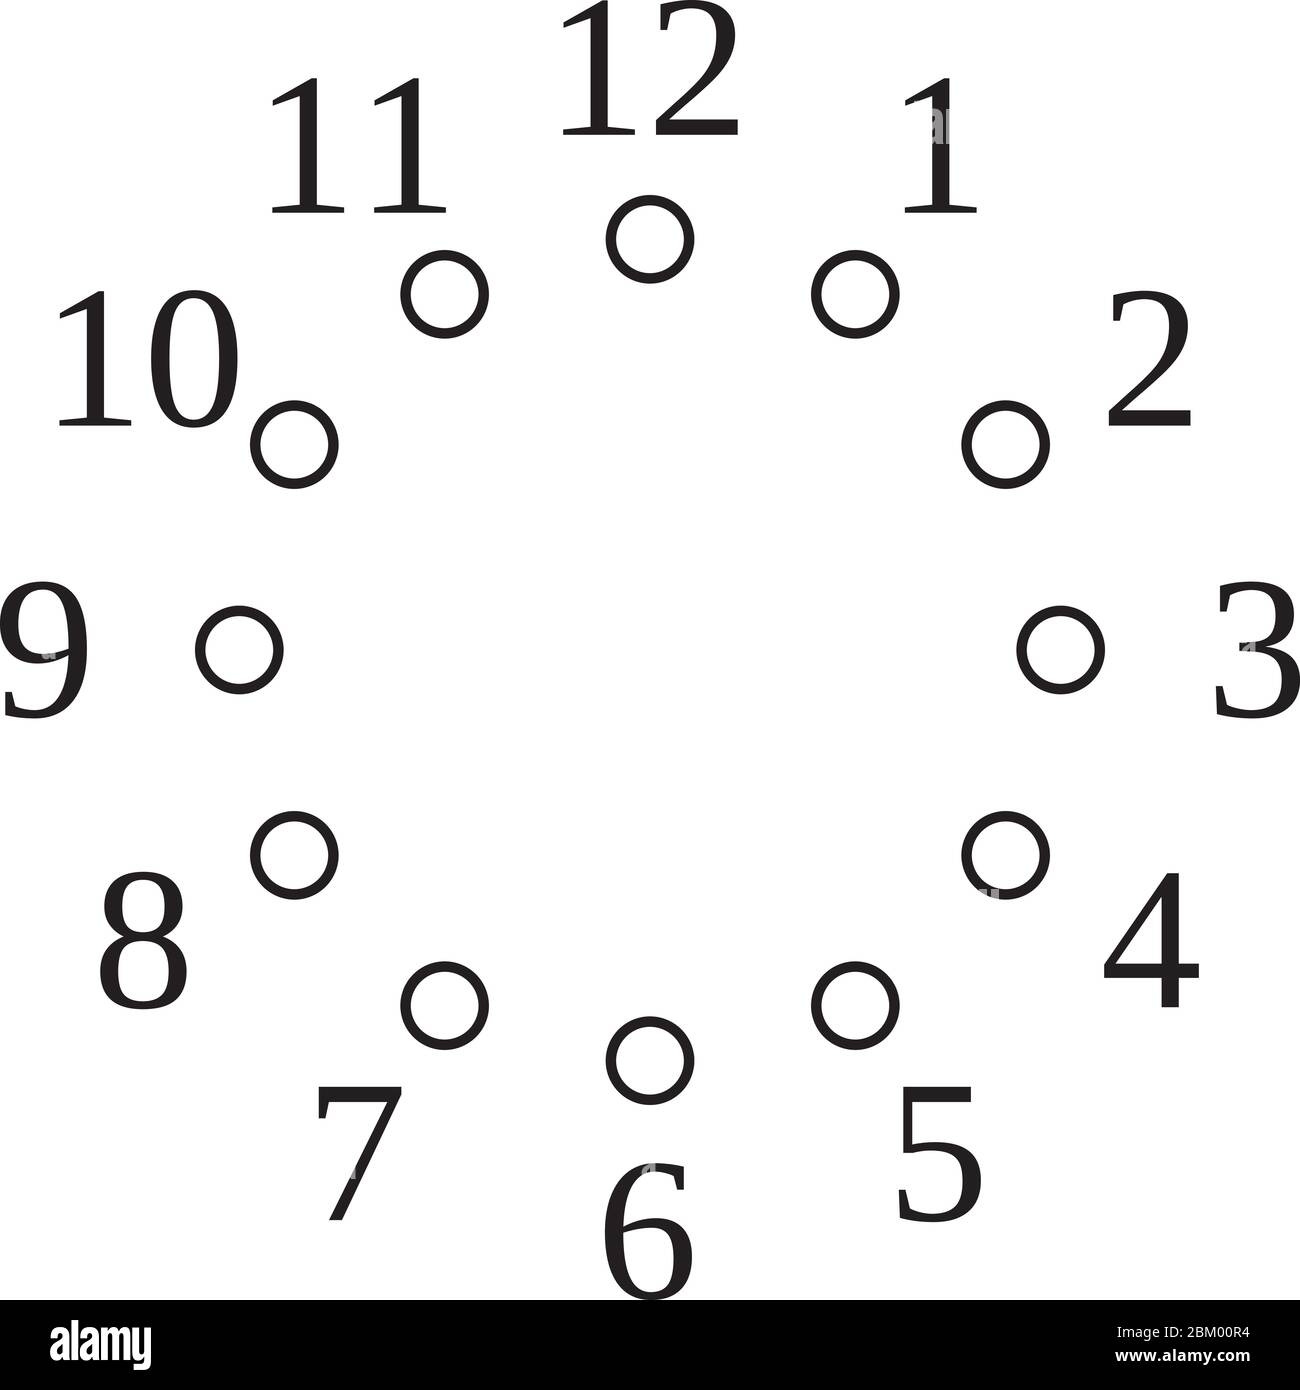 Numbers 1 to 100, black on white Stock Illustration